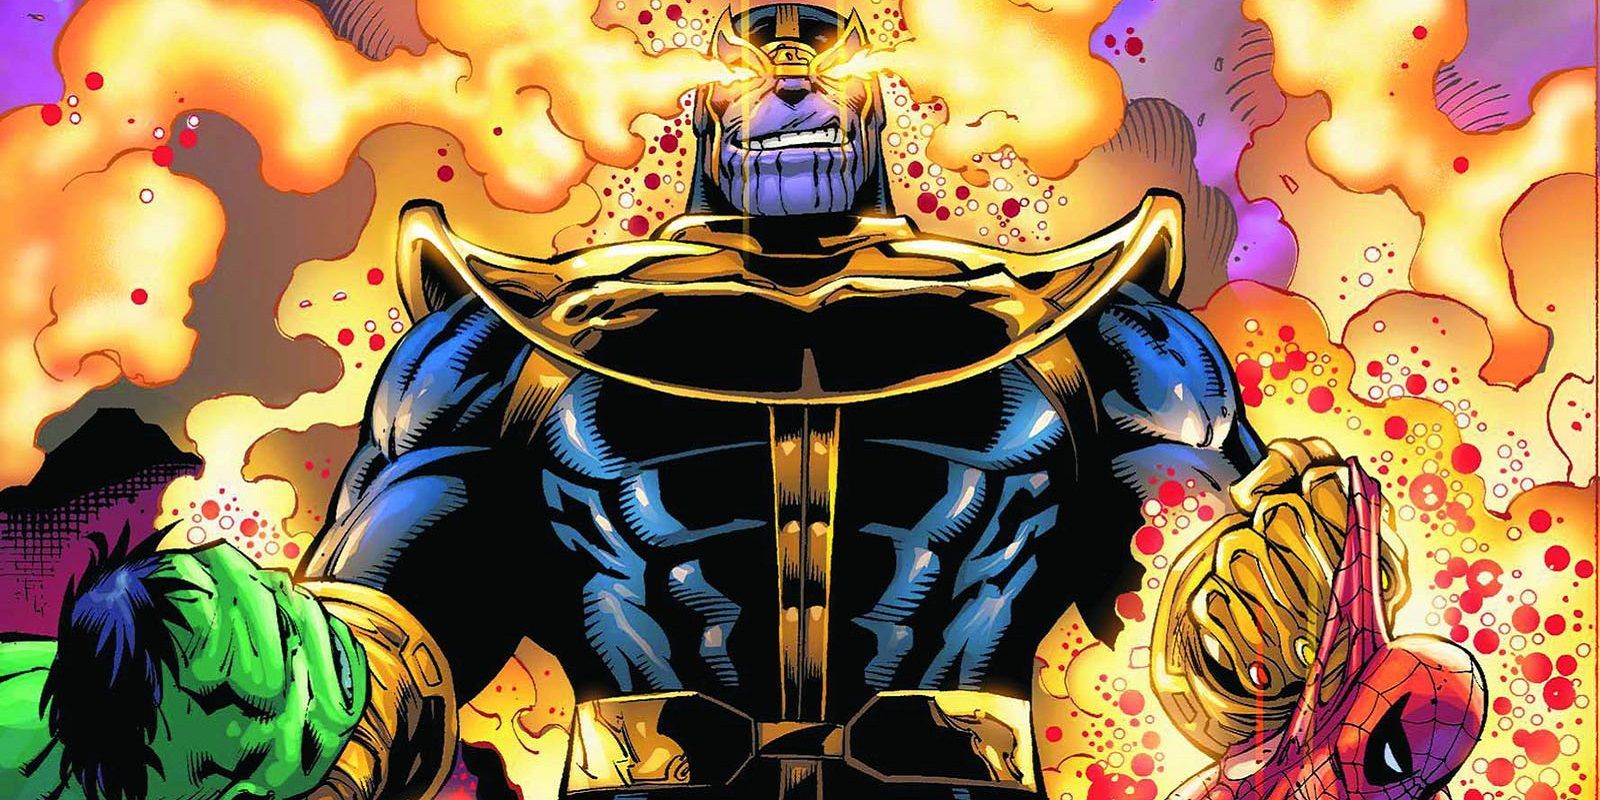 Thanos and the Infinity Gauntlet beat Spider-Man and Hulk